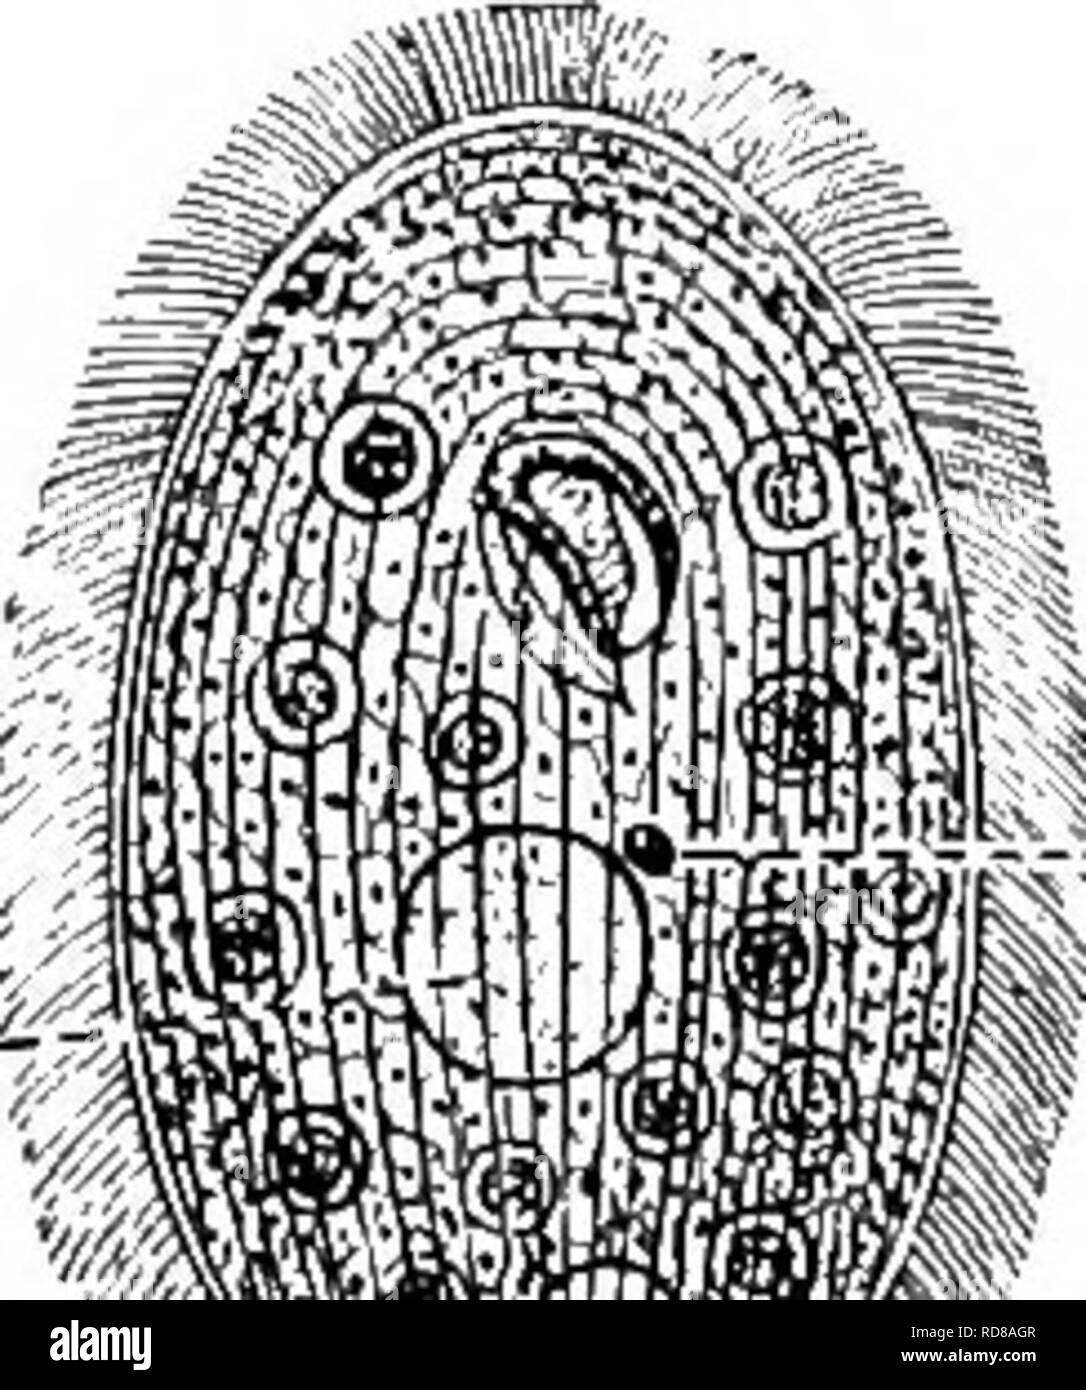 . Fresh-water biology. Freshwater biology. Fig. 496. Frontonia leucas. V, vacuole. , canal; iV, macronucleus; «, micronucleus; X i6s. (After Calkins.) 86 (85) Ovate, flattened, rounded at each end. Mouth triangular or crescent- shaped, lateral, in front of the middle of the body. Glaucoma Ehrenberg. Representative species. Glaucoma scintillans Ehrenberg 1830. The vibratile membranes extending around the mouth pre- senting a bilabial appearance. Nucleus large, central. Con- tractile vacuole posterior. Length 75 ^t. Infusions. Fig. 497. Glaucoma scintillans. cv, contractile vacuole; macn, macro- Stock Photo